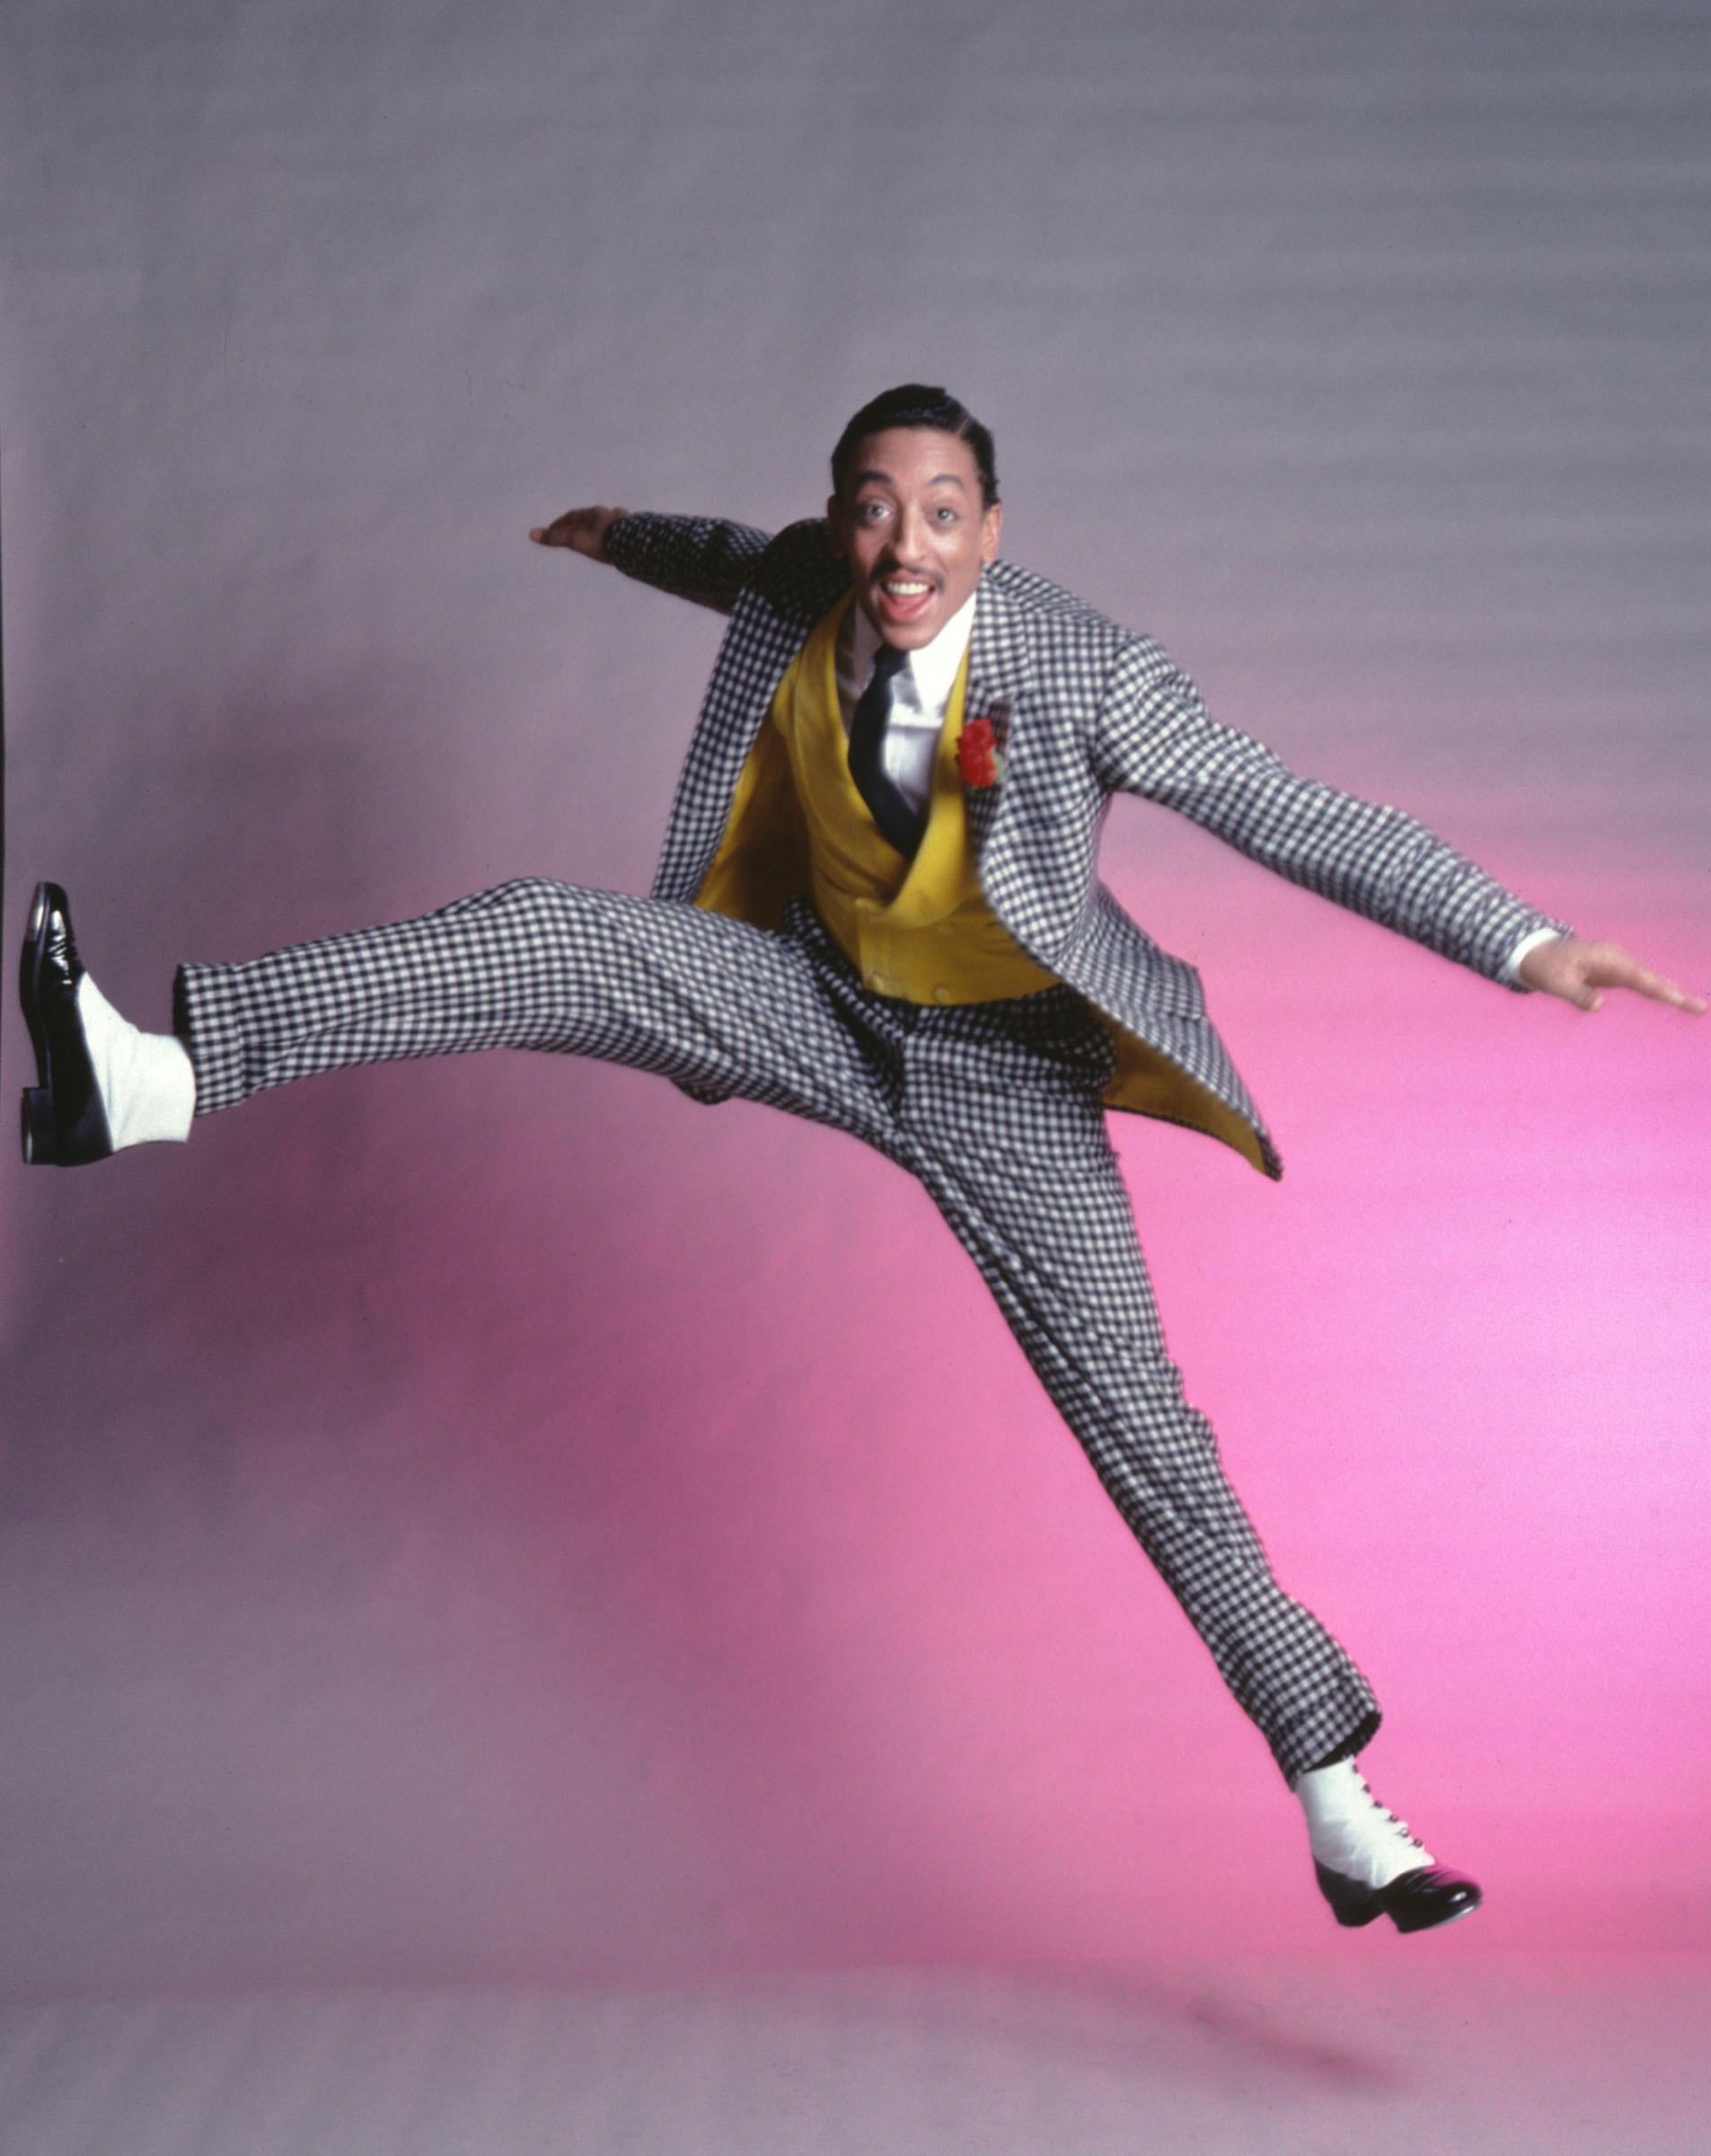 Jack Mitchell Color Photograph – Gregory Hines in „Sophisticated Ladies“, Farbe 17 x 22 Zoll“, Ausstellungsfotografie